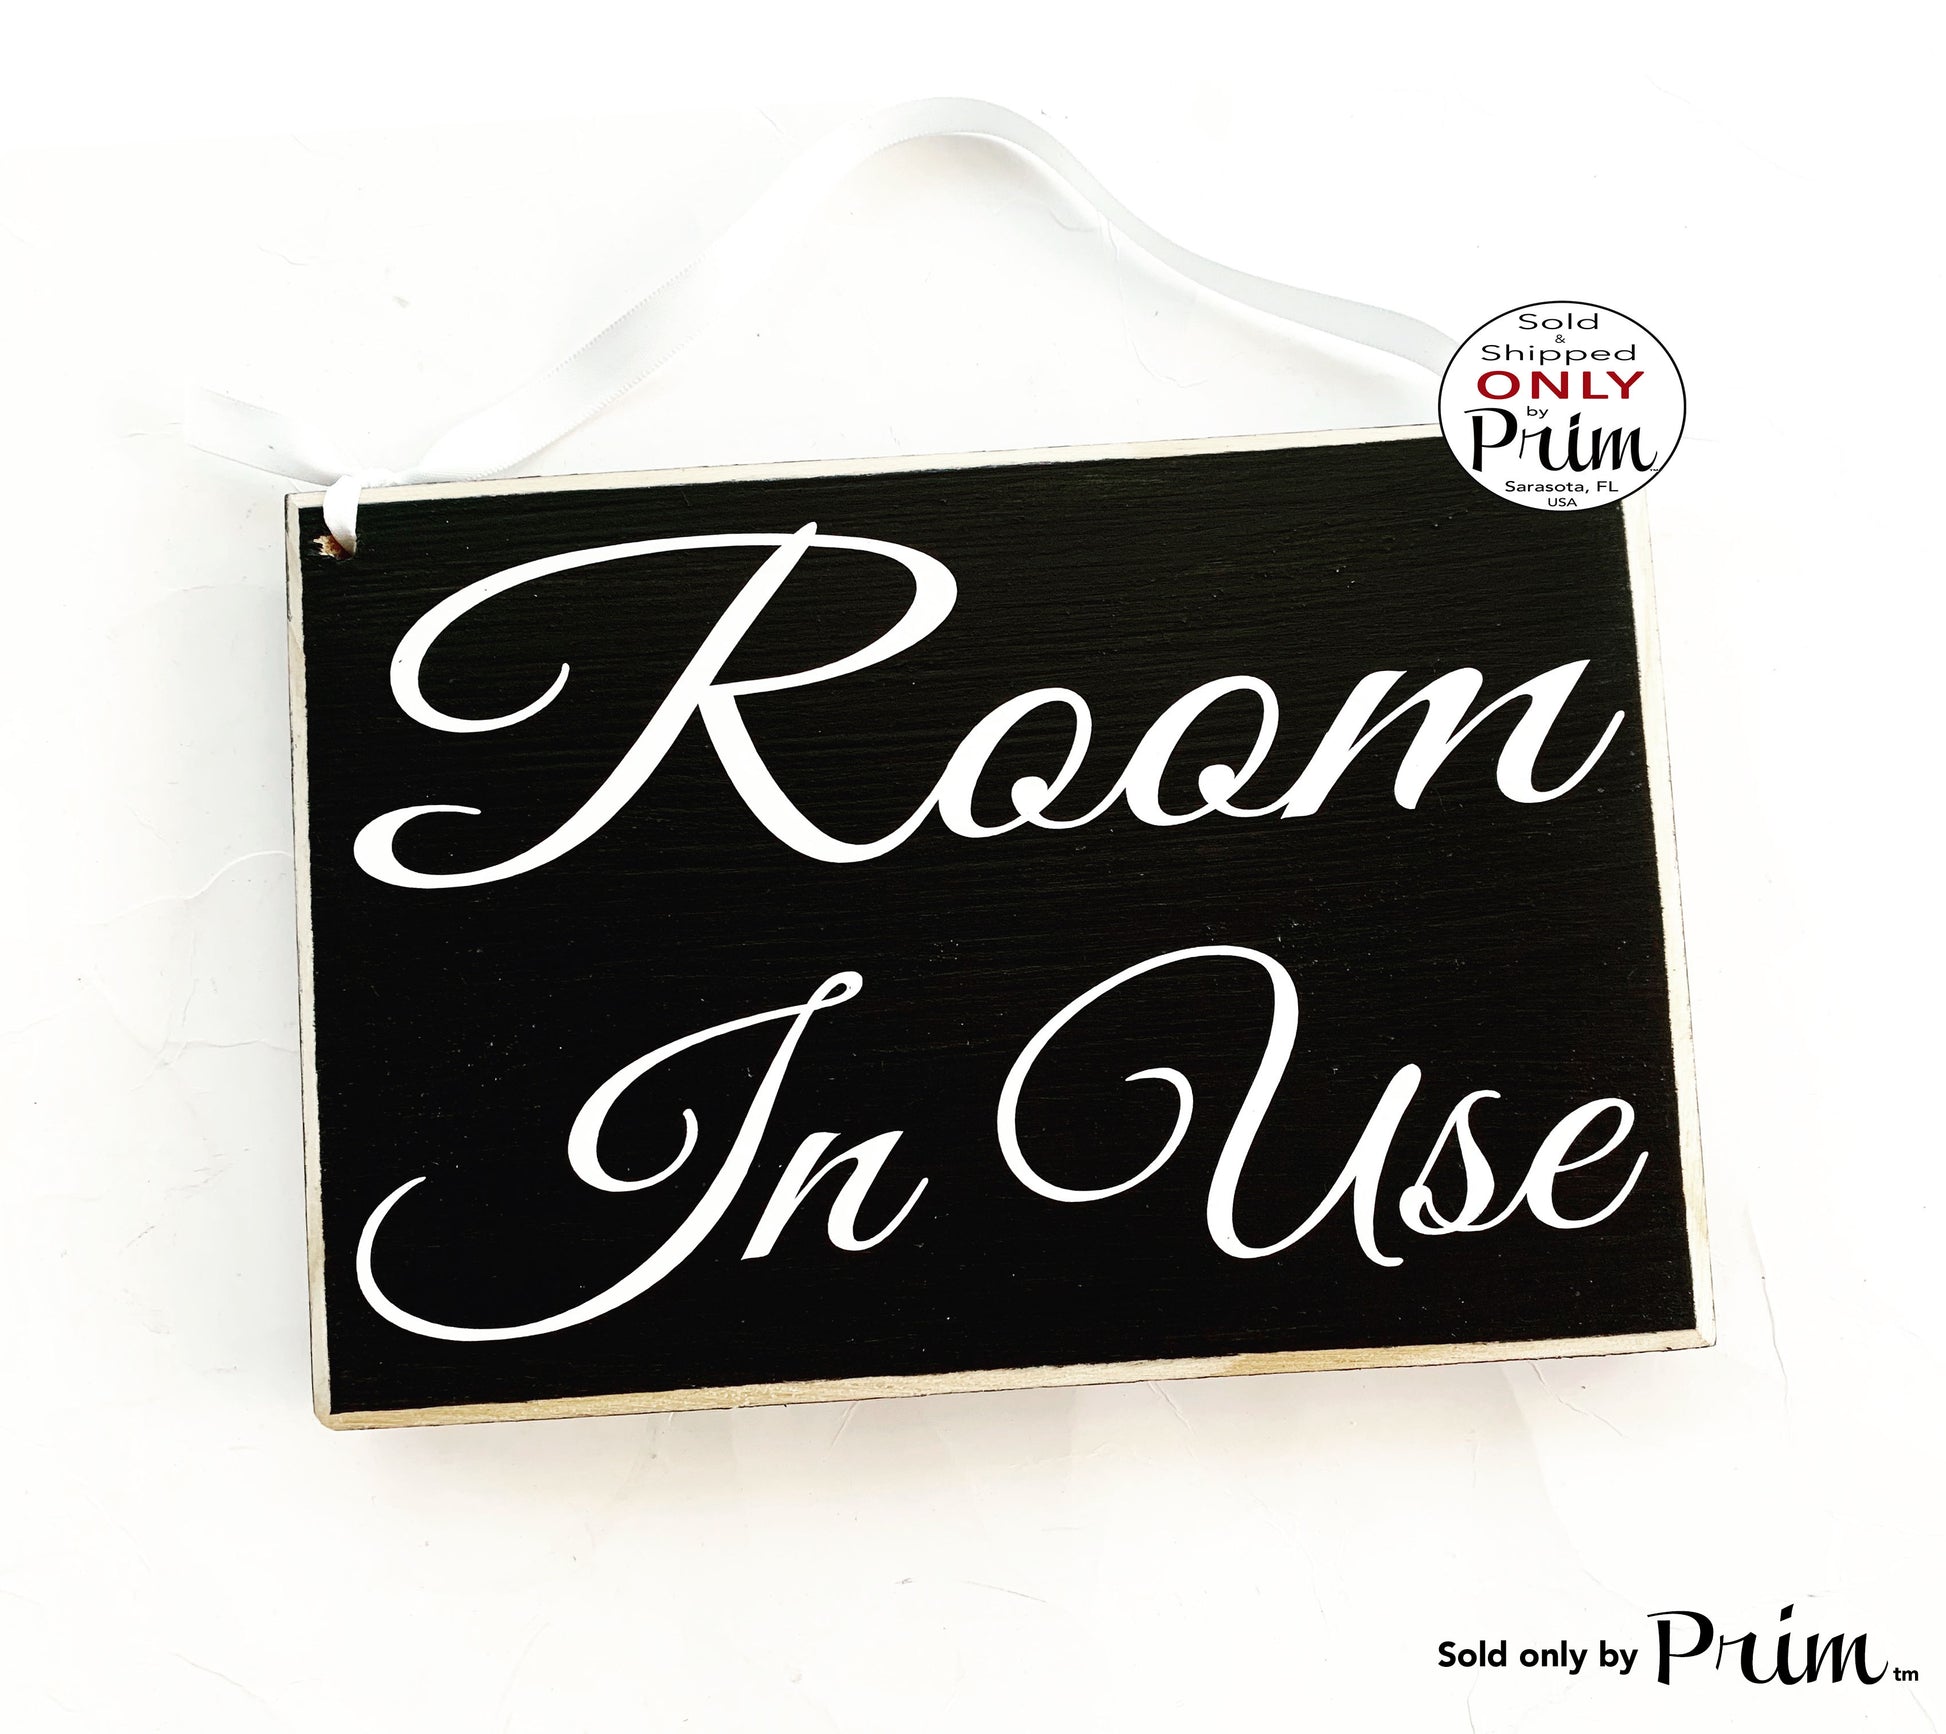 8x6 Room In Use Custom Wood Sign | Meeting In Session Conference Massage Spa Salon Please Do Not Disturb Wall Door Plaque Hanger